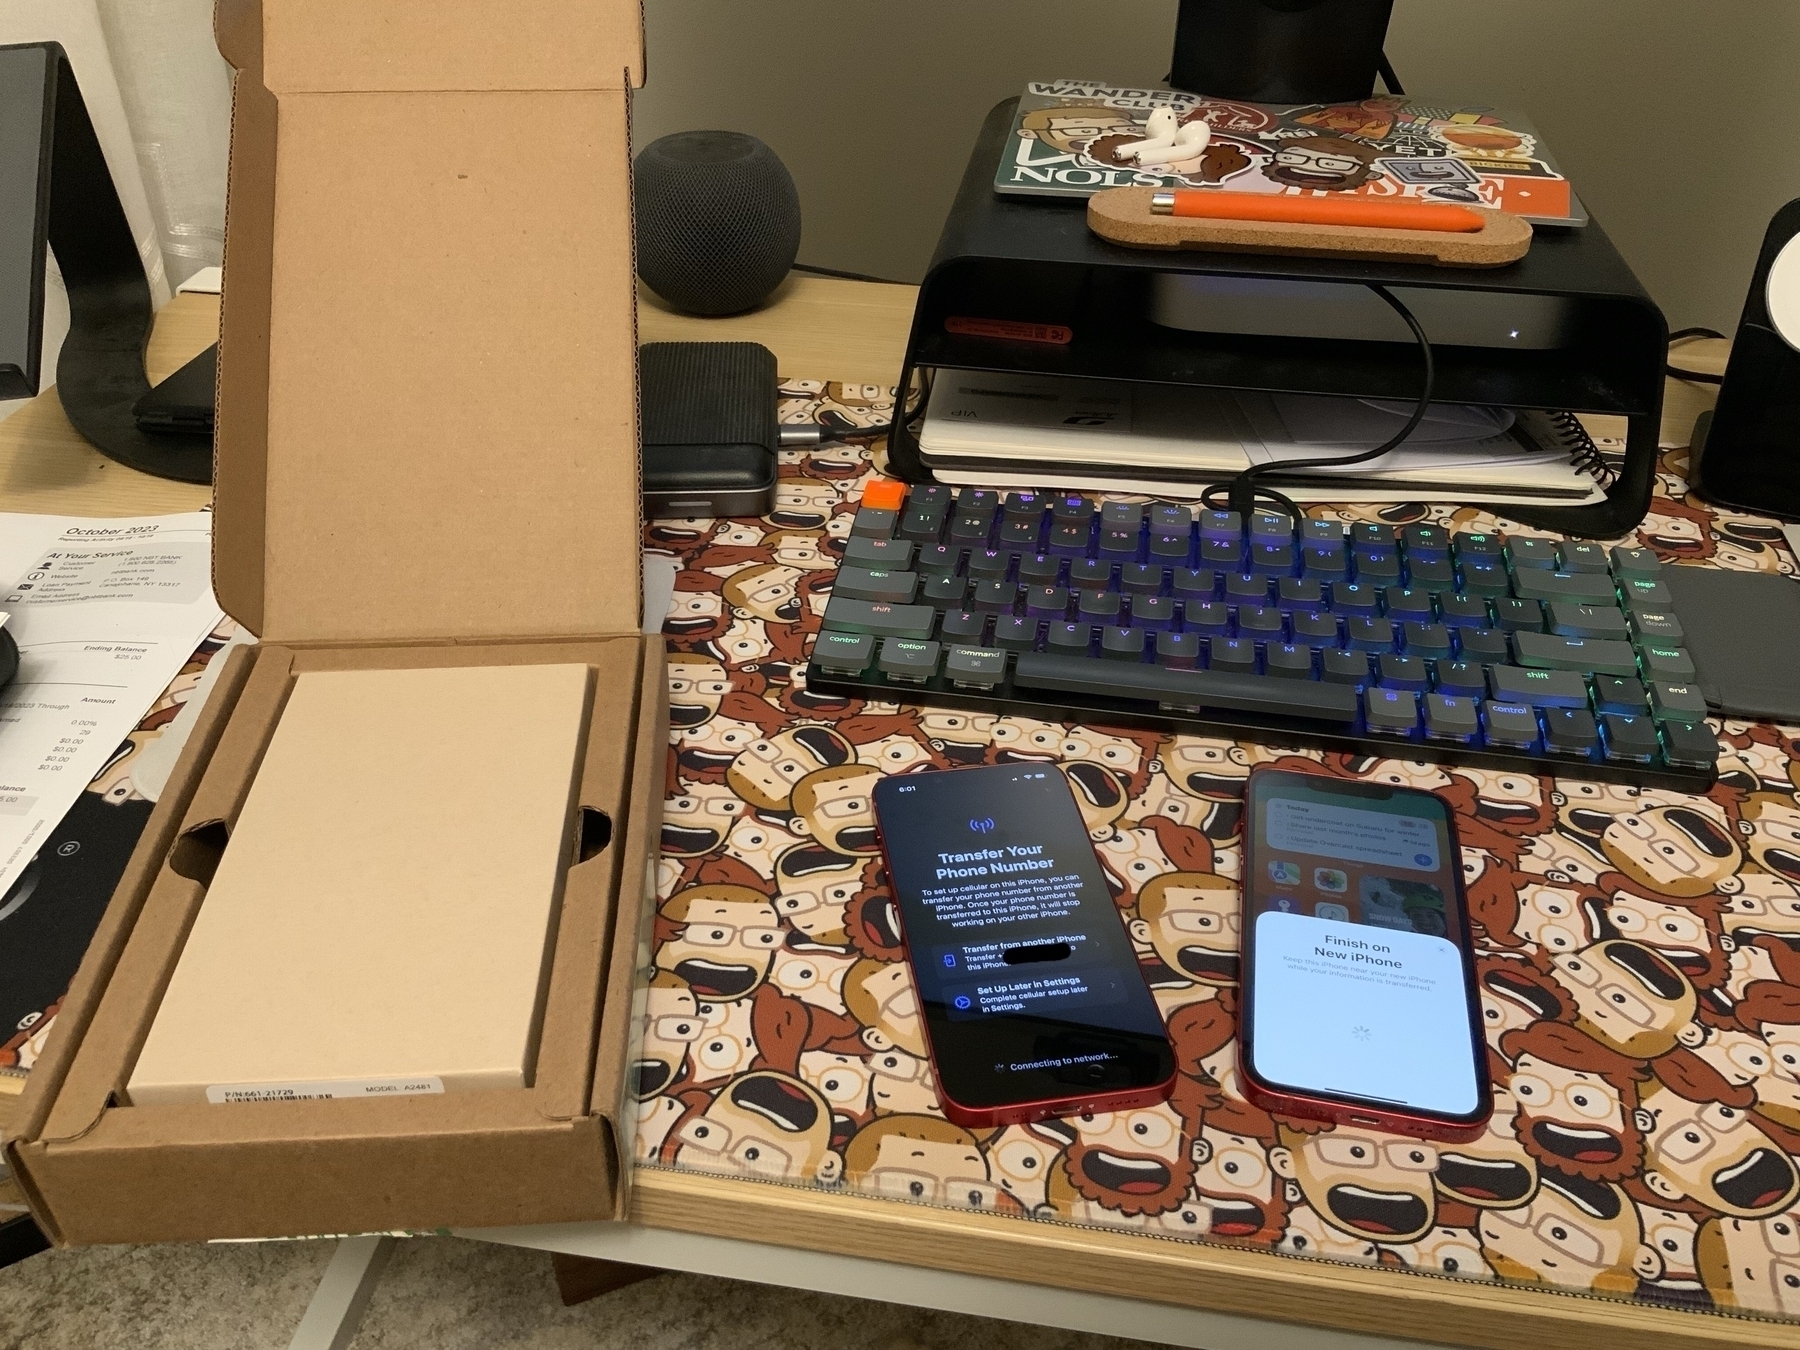 Two iPhones on a desk showing setup screens.